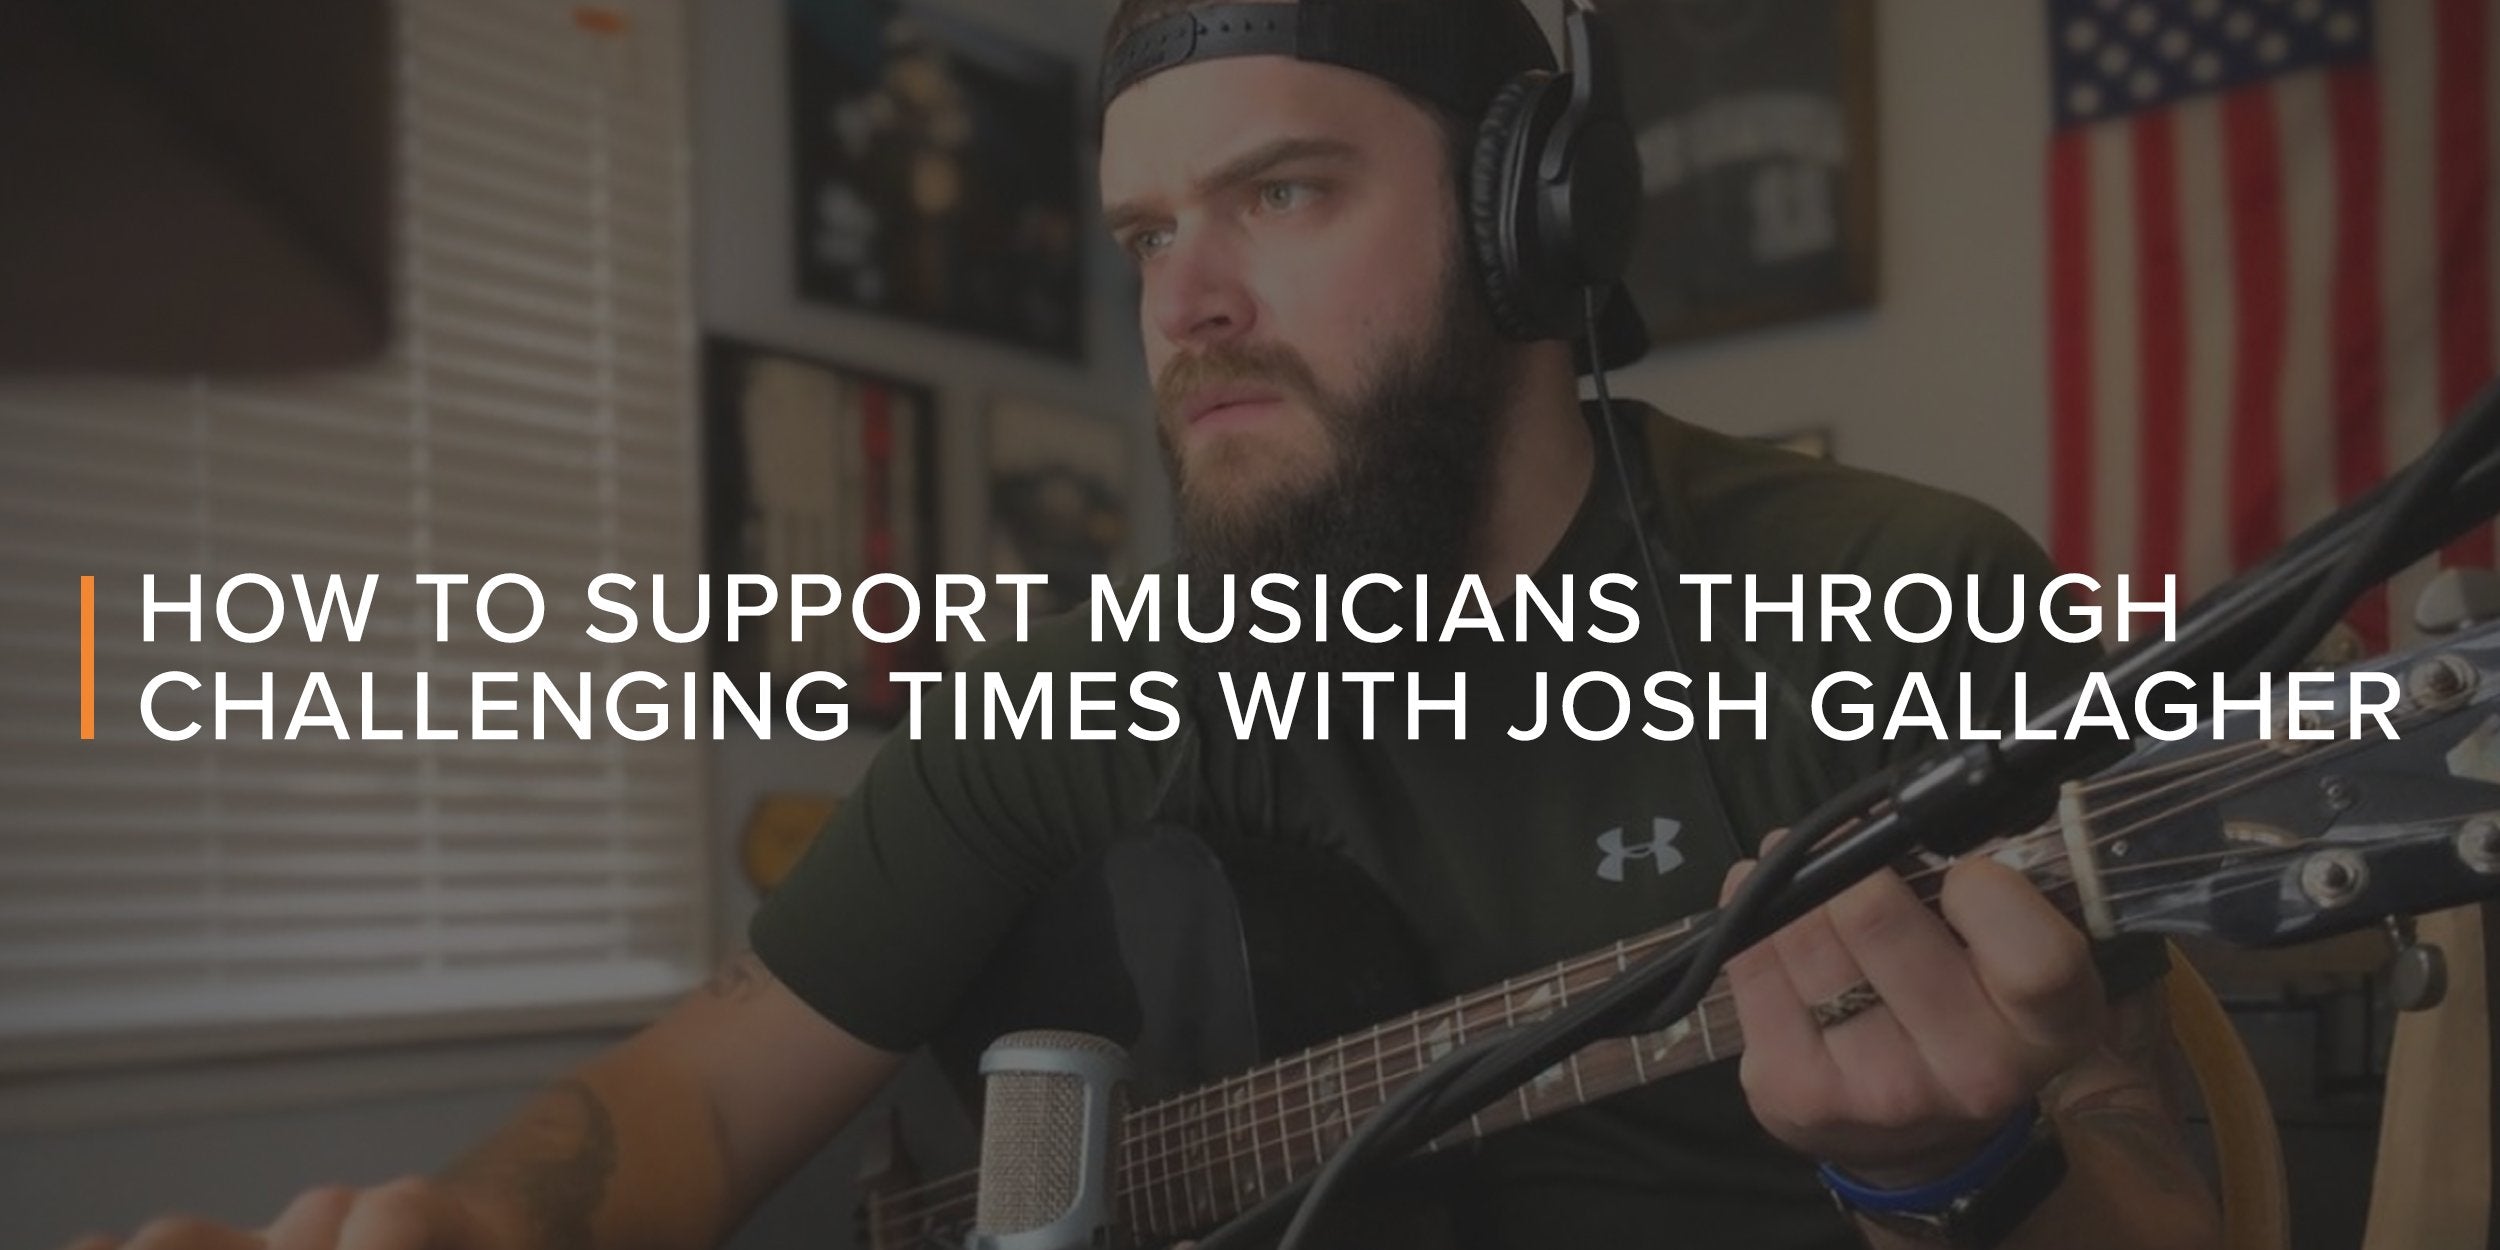 How to Support Musicians Through Challenging Times with Josh Gallagher